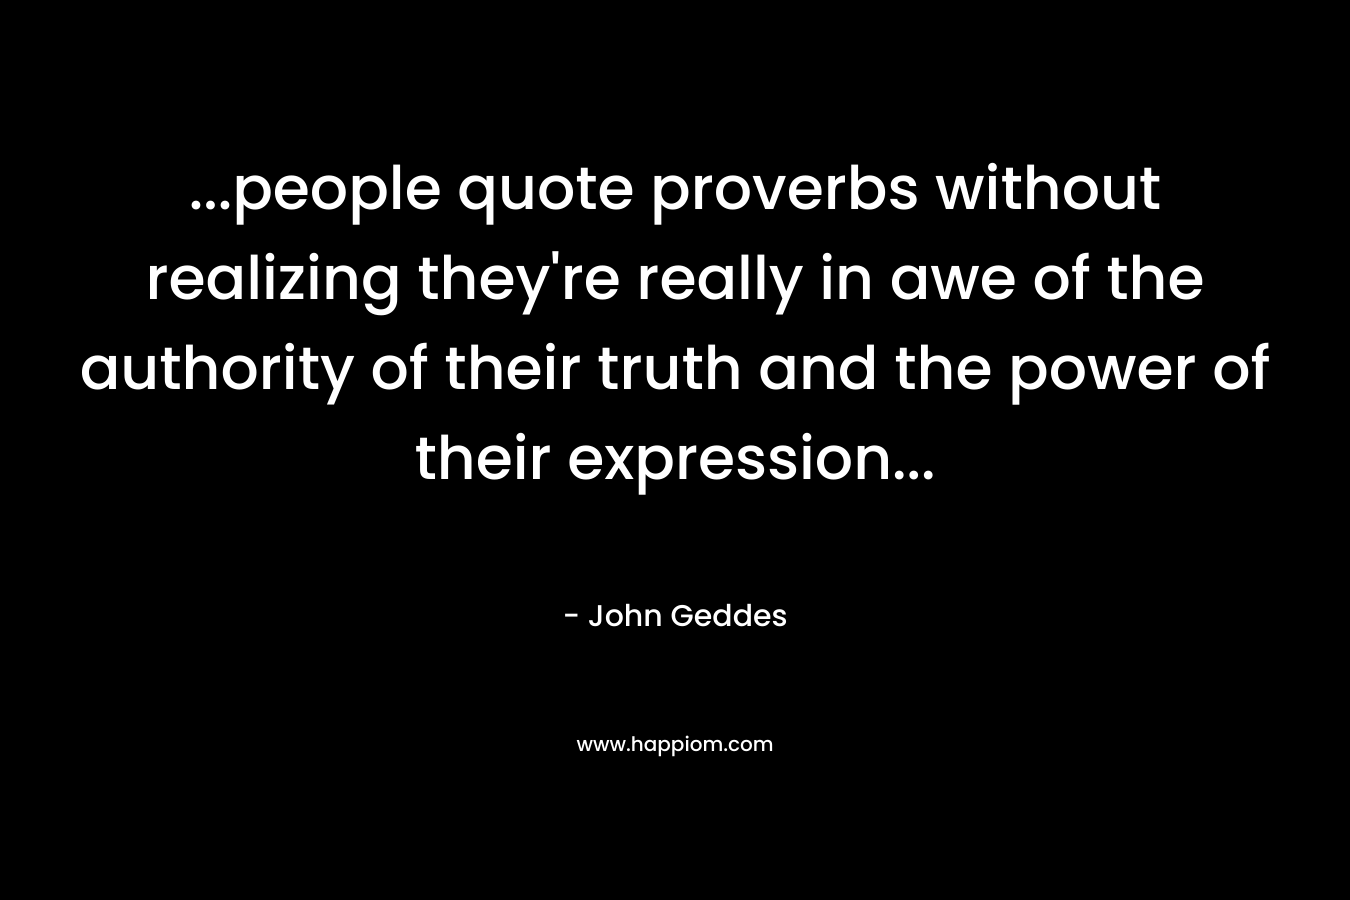 ...people quote proverbs without realizing they're really in awe of the authority of their truth and the power of their expression...